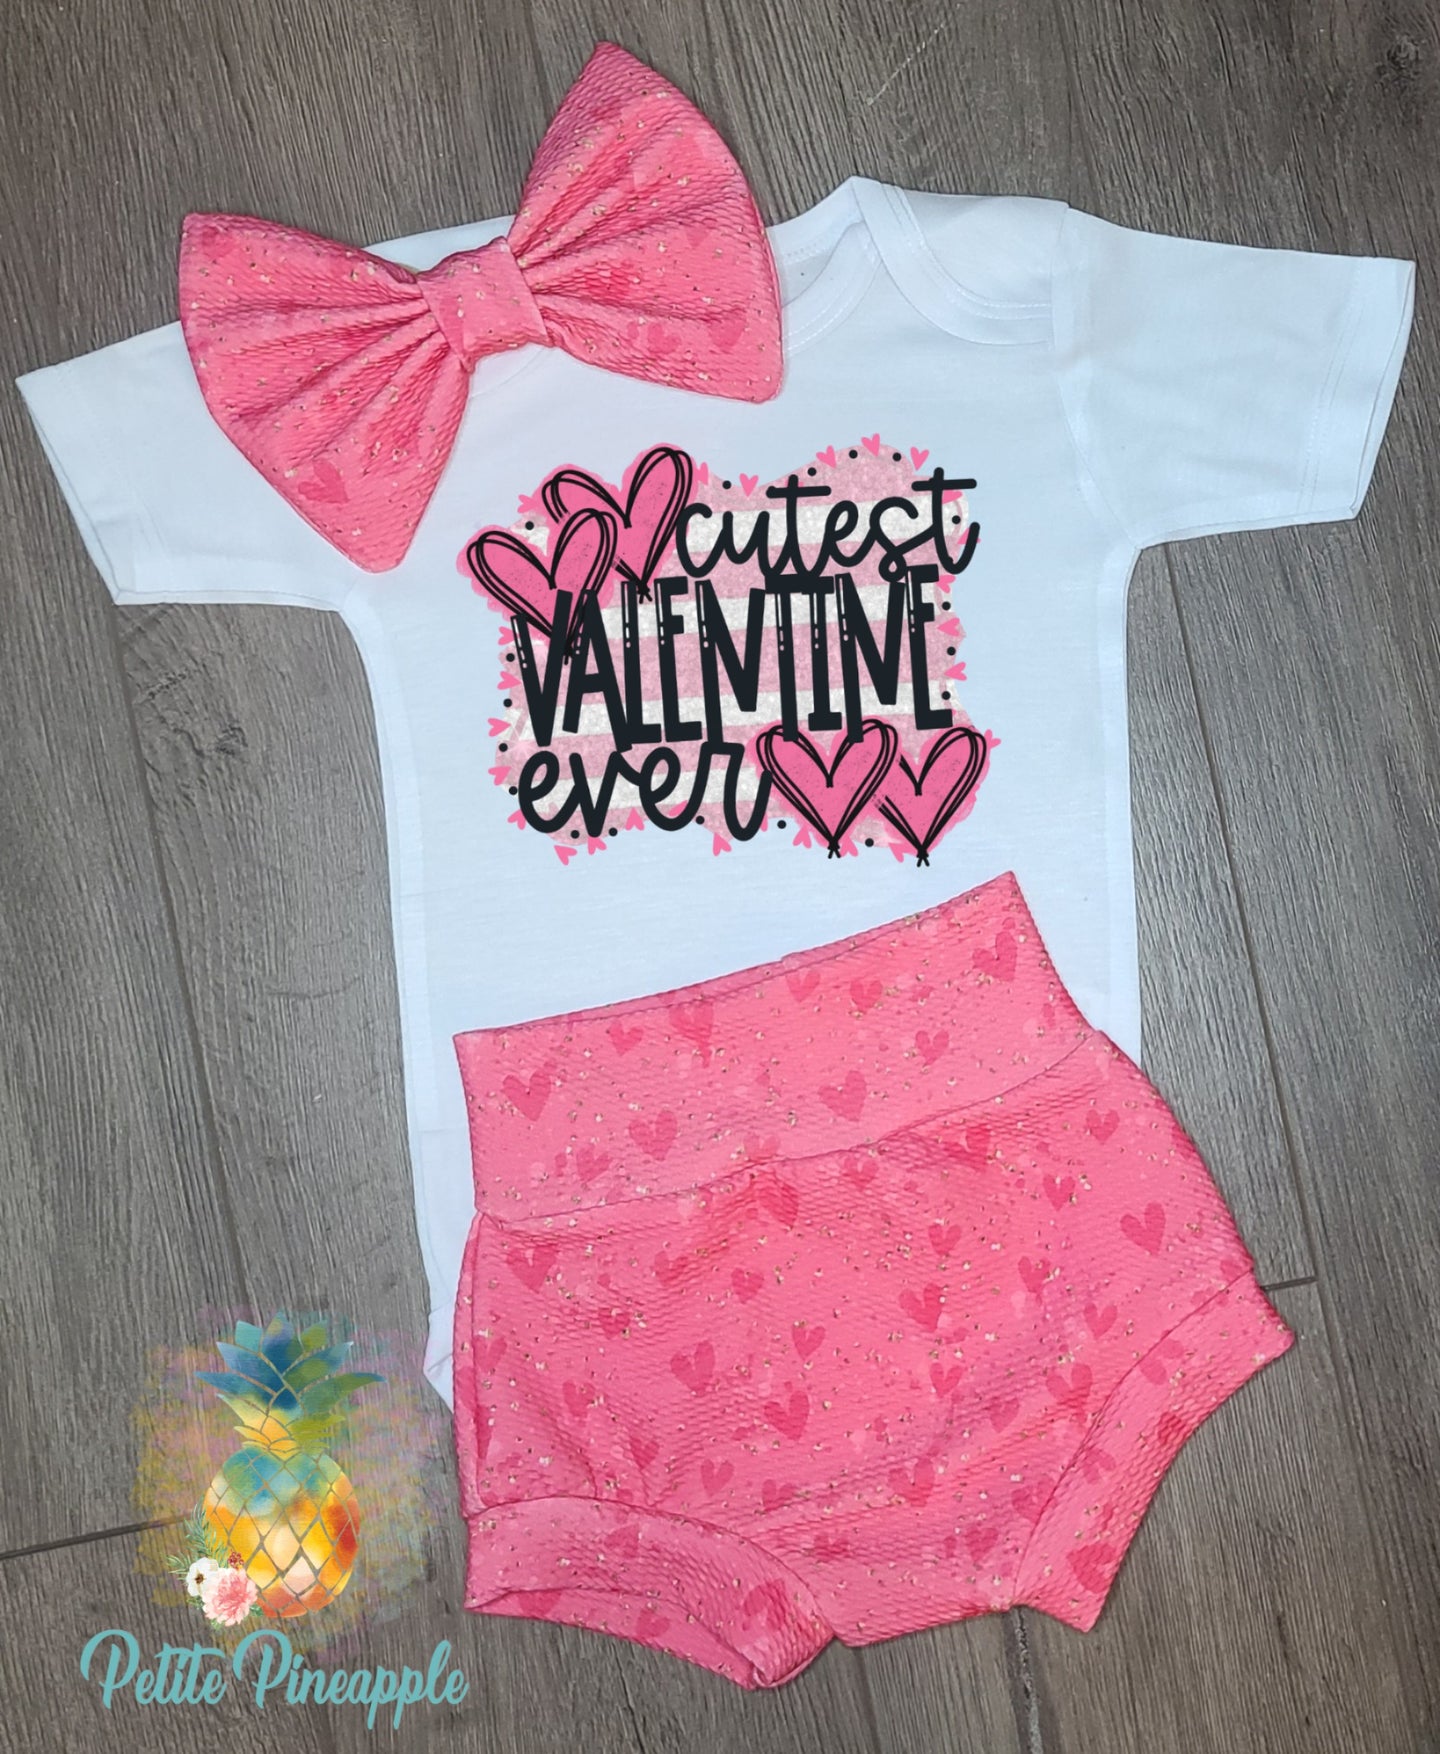 Cutest Valentine ever outfit